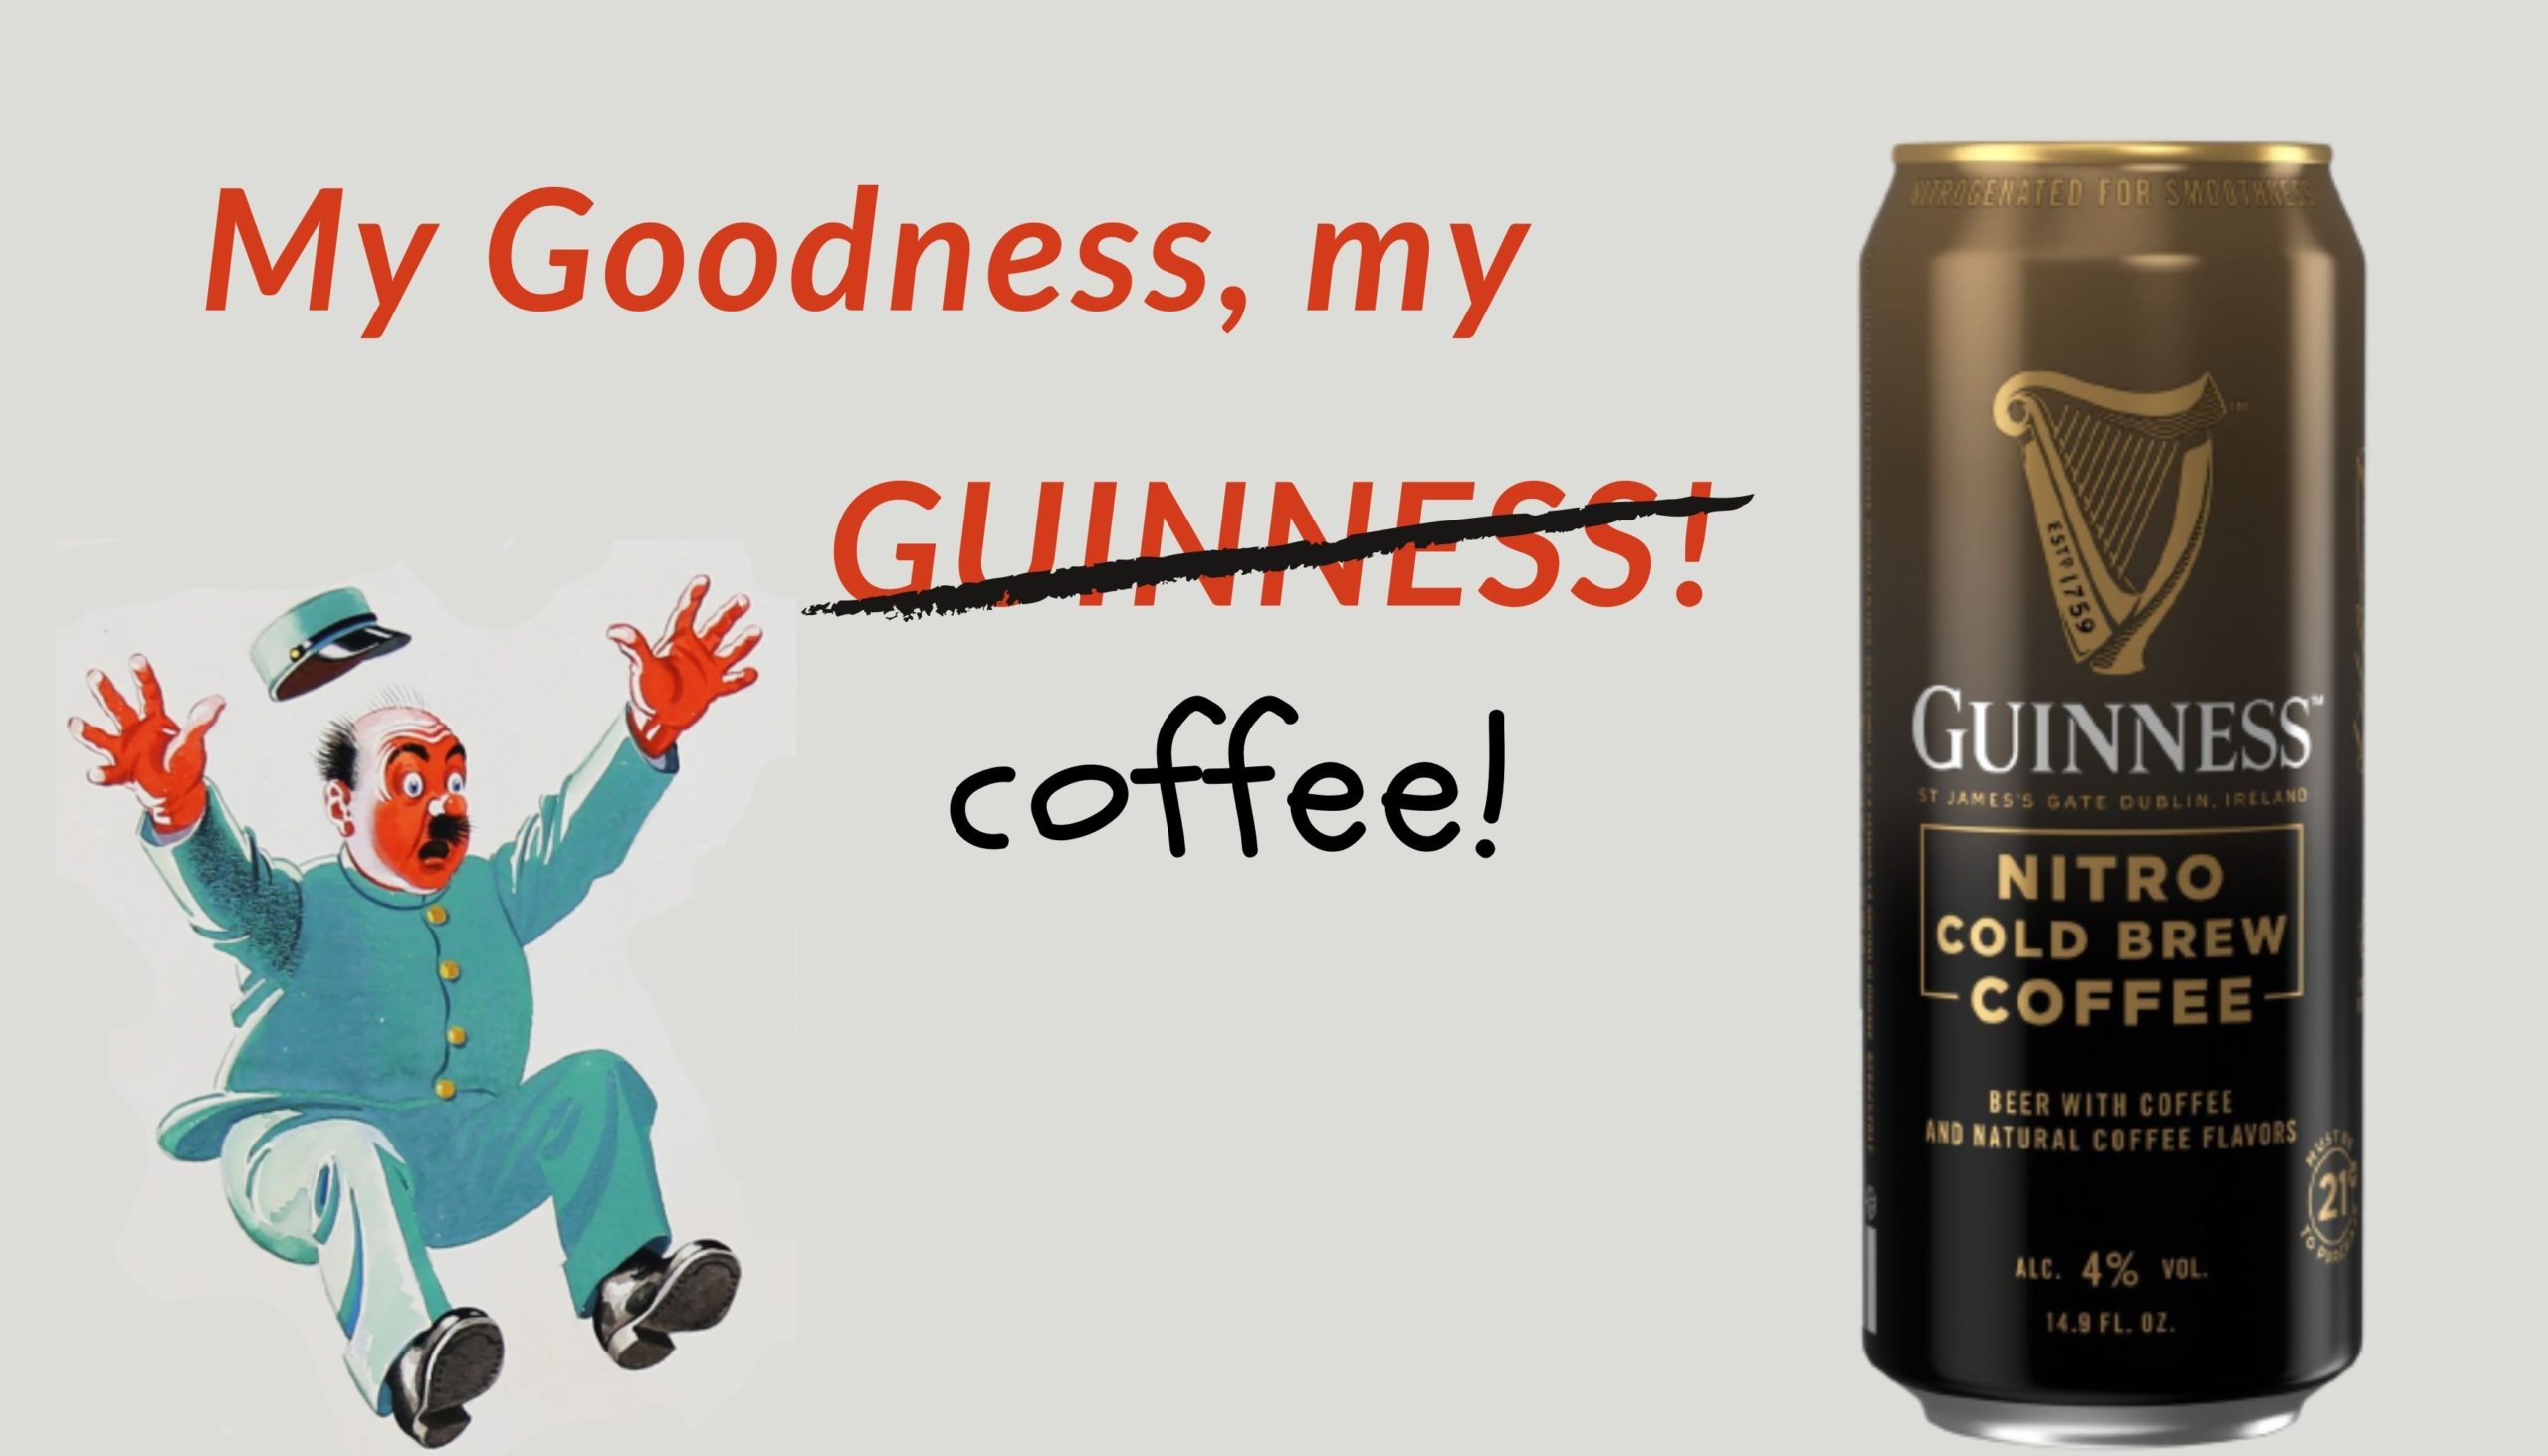 My goodness, my coffee!  Guinness have launched a new Nitro Cold Brew Coffee beer